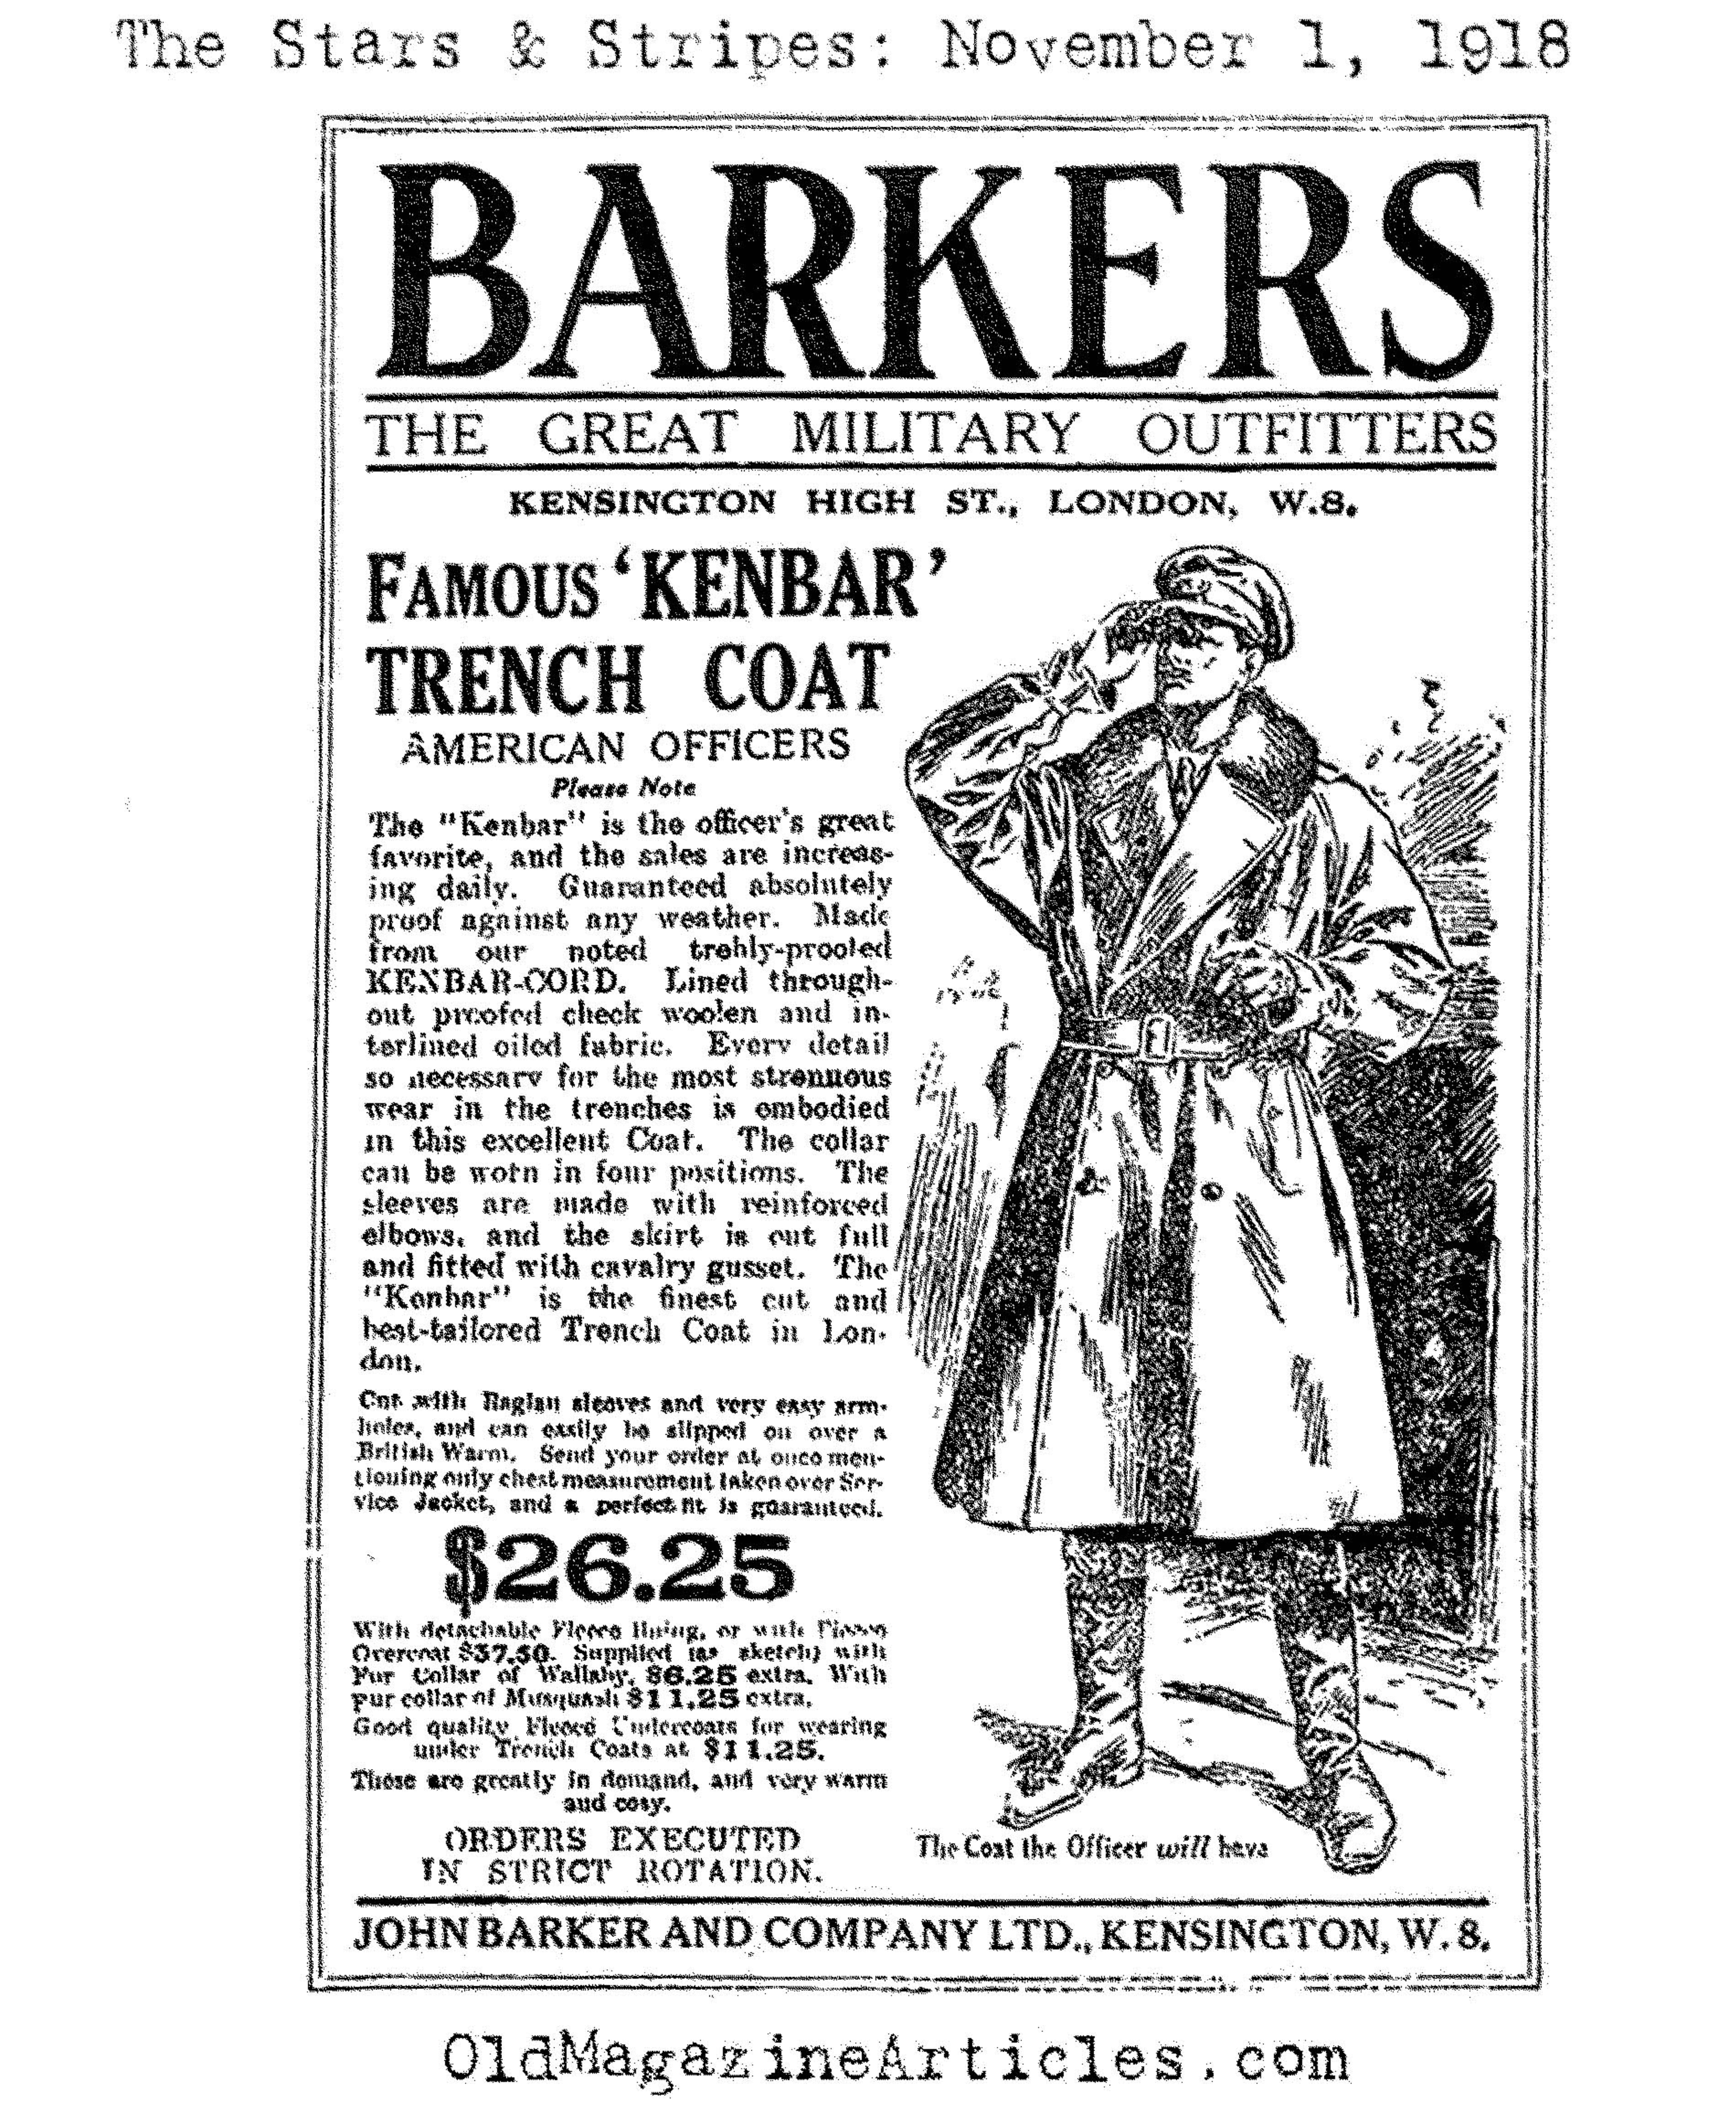 Trench Coat by Barker  (The Stars and Stripes, 1918)